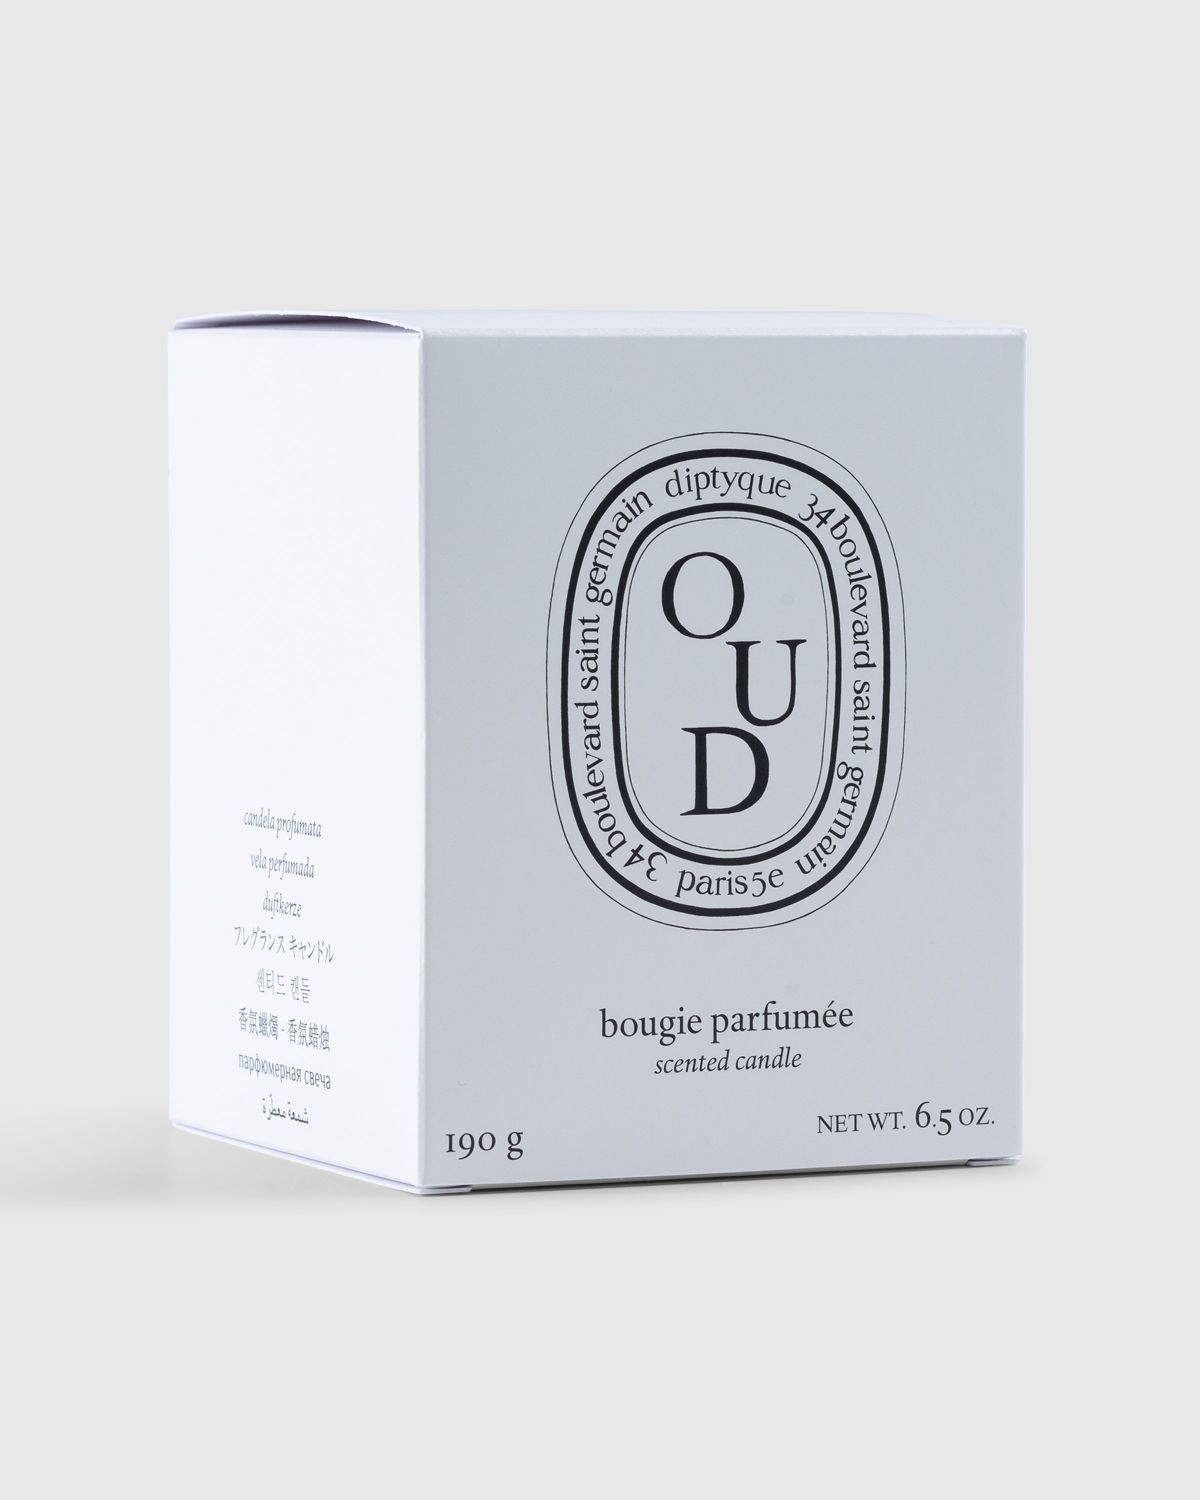 Diptyque – Standard Candle Oud 190g - Candles - White - Image 3